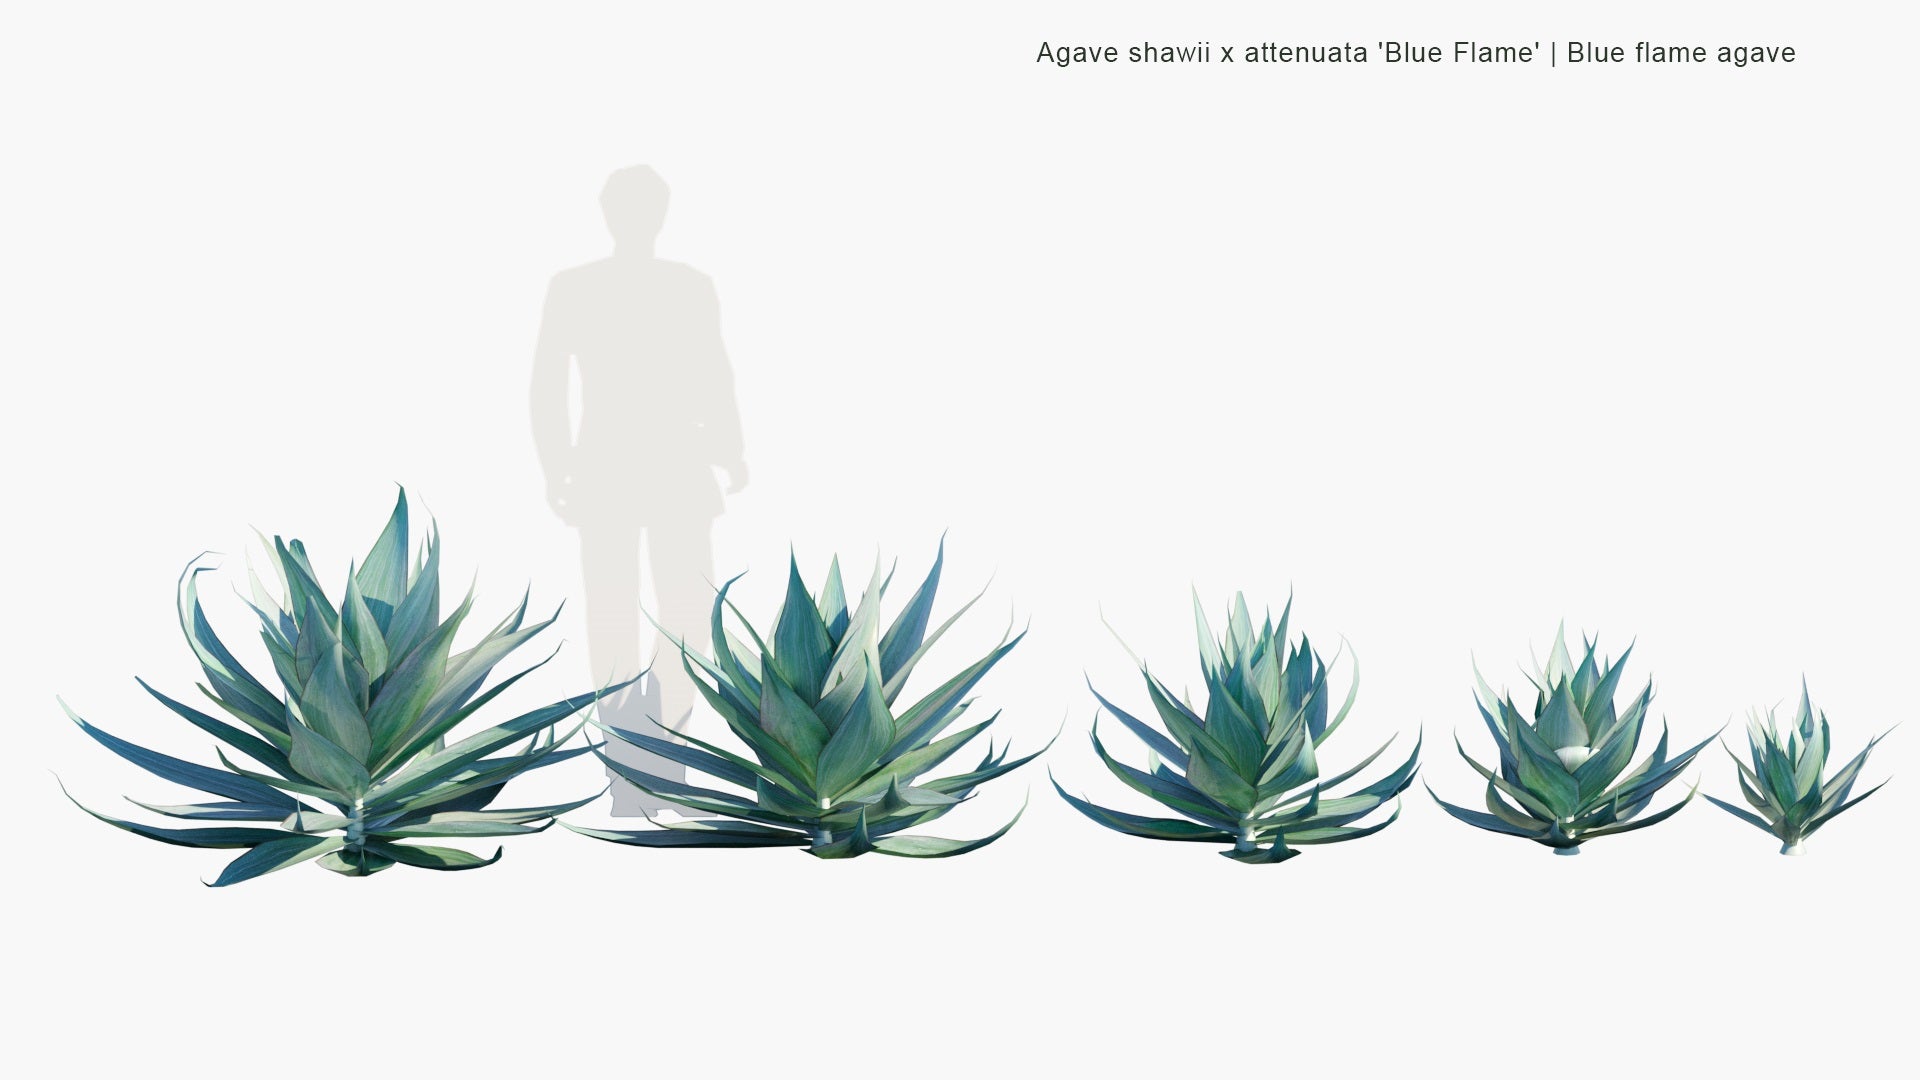 Low Poly Agave Shawii x Attenuata 'Blue Flame' - Blue Flame Agave (3D Model)